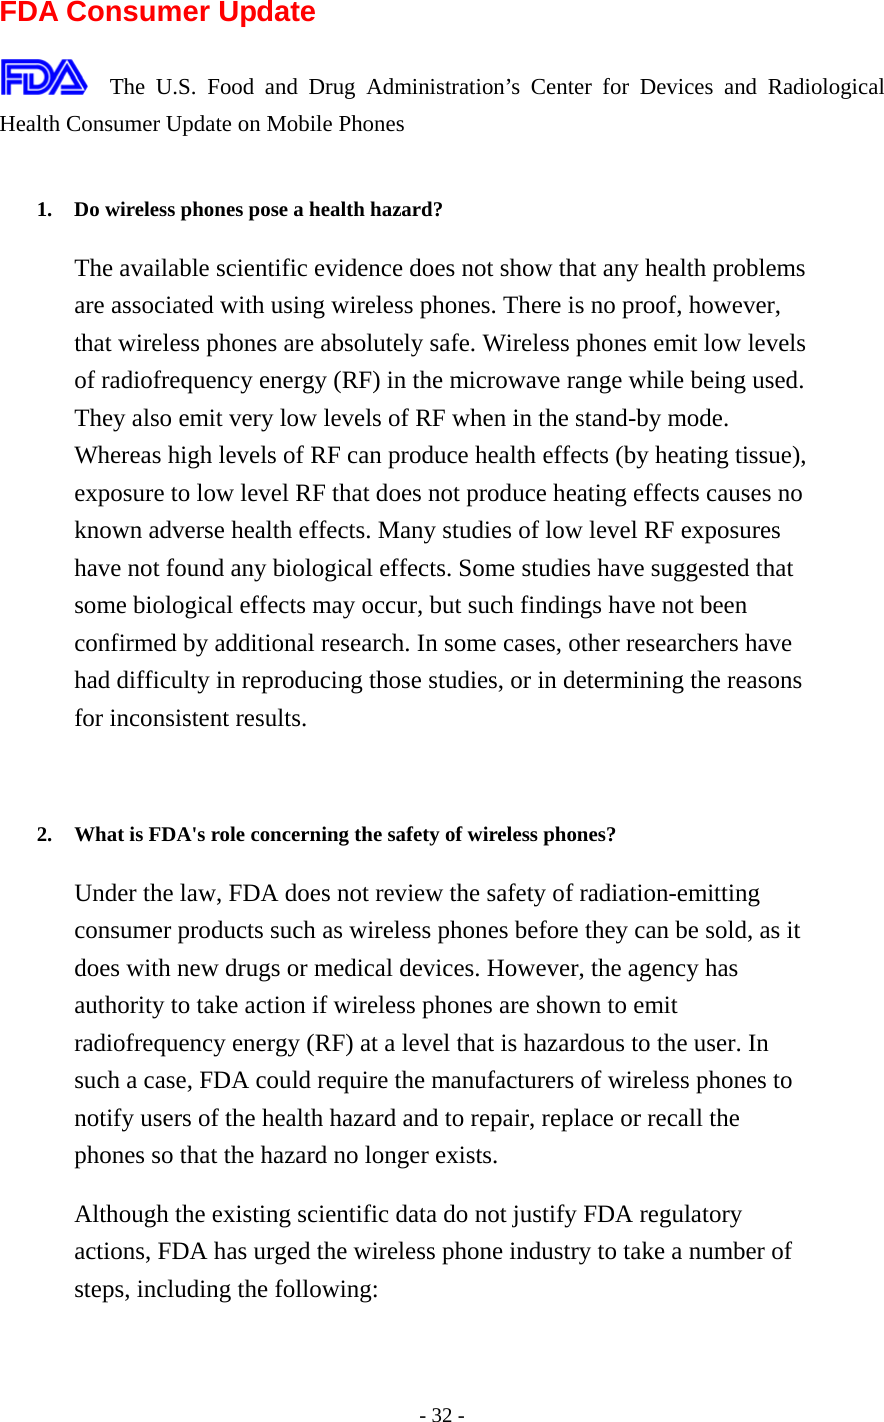  FDA Consumer Update  The U.S. Food and Drug Administration’s Center for Devices and Radiological Health Consumer Update on Mobile Phones  1.  Do wireless phones pose a health hazard?   The available scientific evidence does not show that any health problems are associated with using wireless phones. There is no proof, however, that wireless phones are absolutely safe. Wireless phones emit low levels of radiofrequency energy (RF) in the microwave range while being used. They also emit very low levels of RF when in the stand-by mode. Whereas high levels of RF can produce health effects (by heating tissue), exposure to low level RF that does not produce heating effects causes no known adverse health effects. Many studies of low level RF exposures have not found any biological effects. Some studies have suggested that some biological effects may occur, but such findings have not been confirmed by additional research. In some cases, other researchers have had difficulty in reproducing those studies, or in determining the reasons for inconsistent results.   2.  What is FDA&apos;s role concerning the safety of wireless phones?   Under the law, FDA does not review the safety of radiation-emitting consumer products such as wireless phones before they can be sold, as it does with new drugs or medical devices. However, the agency has authority to take action if wireless phones are shown to emit radiofrequency energy (RF) at a level that is hazardous to the user. In such a case, FDA could require the manufacturers of wireless phones to notify users of the health hazard and to repair, replace or recall the phones so that the hazard no longer exists. Although the existing scientific data do not justify FDA regulatory actions, FDA has urged the wireless phone industry to take a number of steps, including the following: - 32 - 